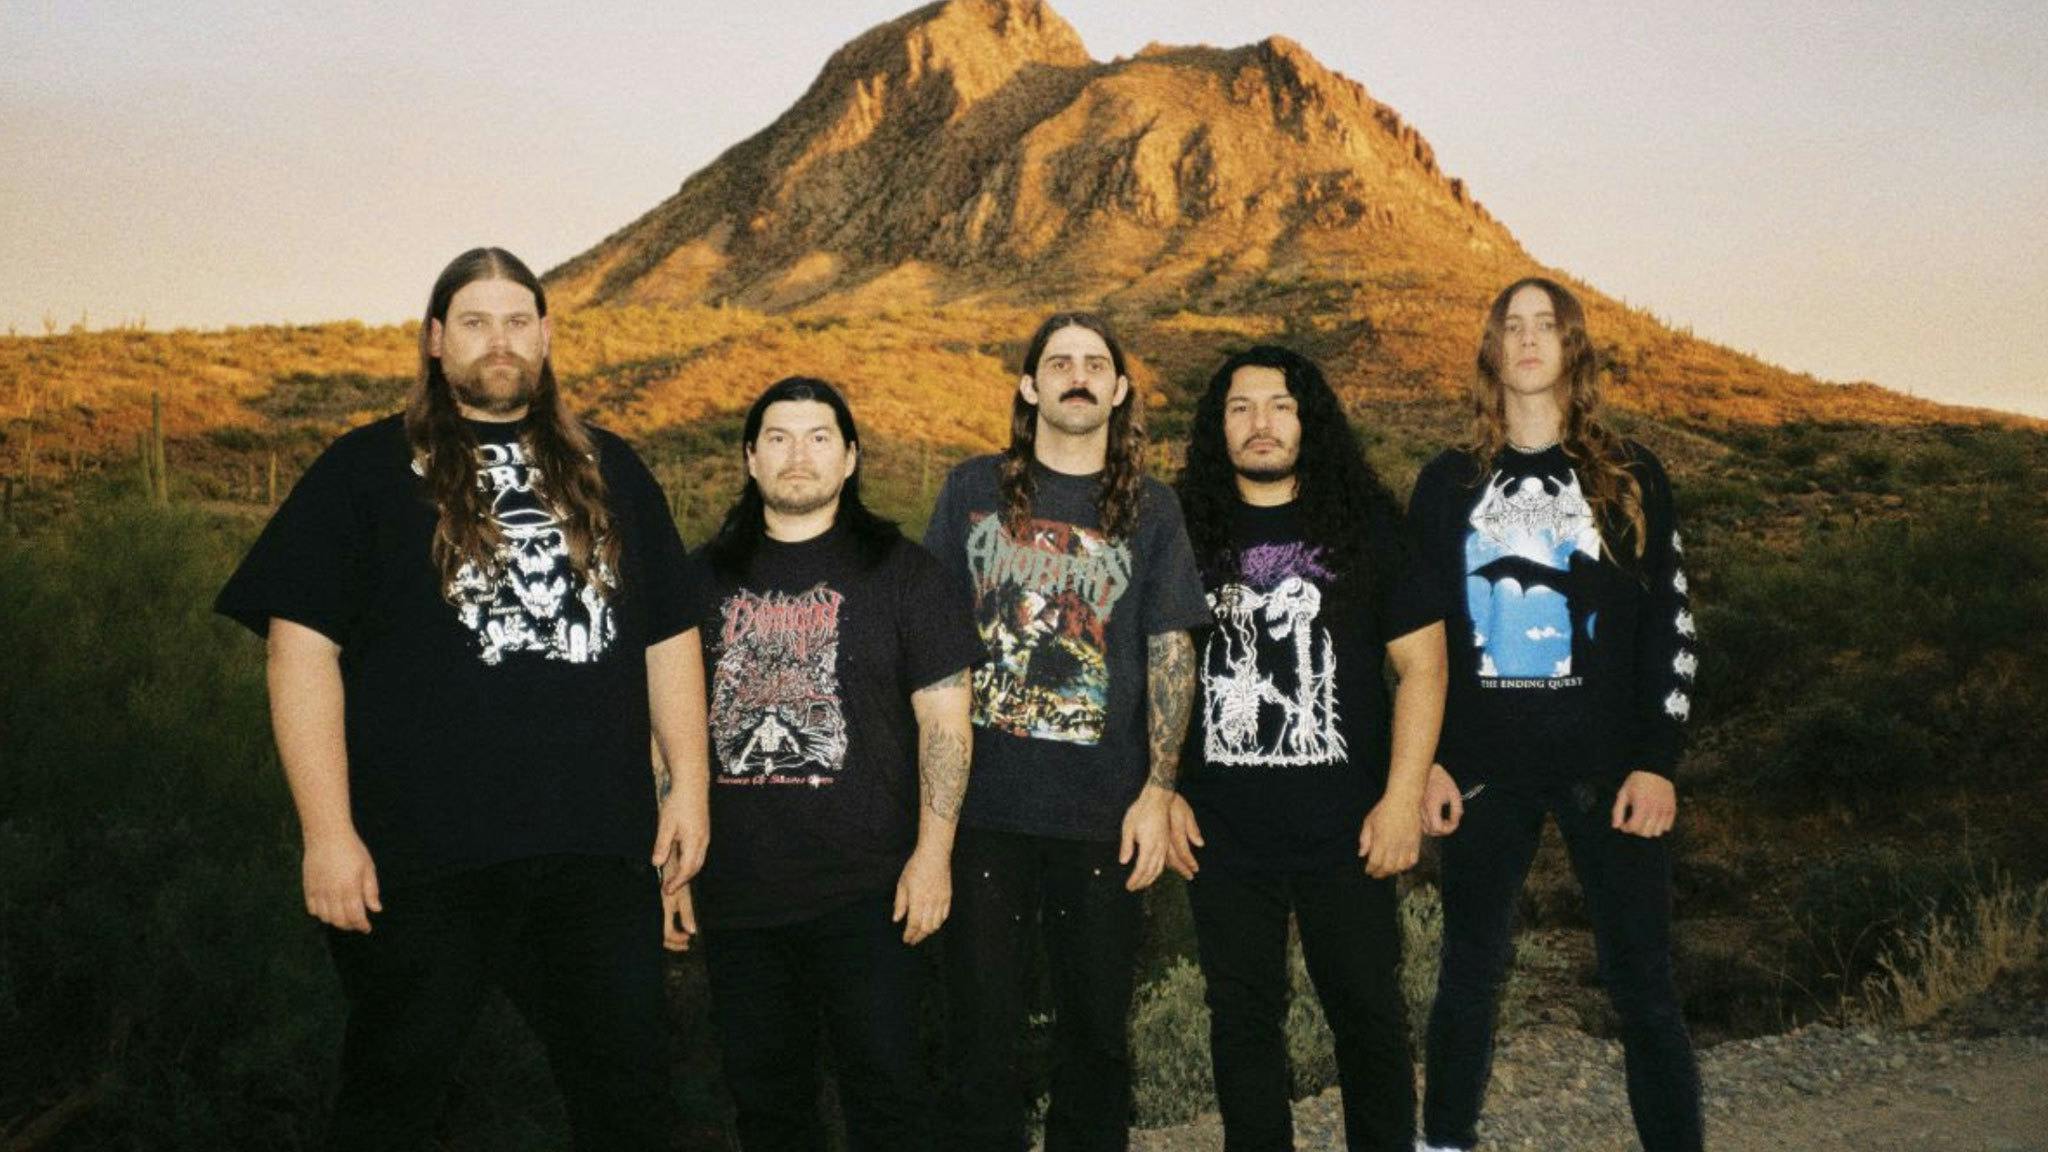 Gatecreeper have just unleashed a brand-new single, Caught In The Treads